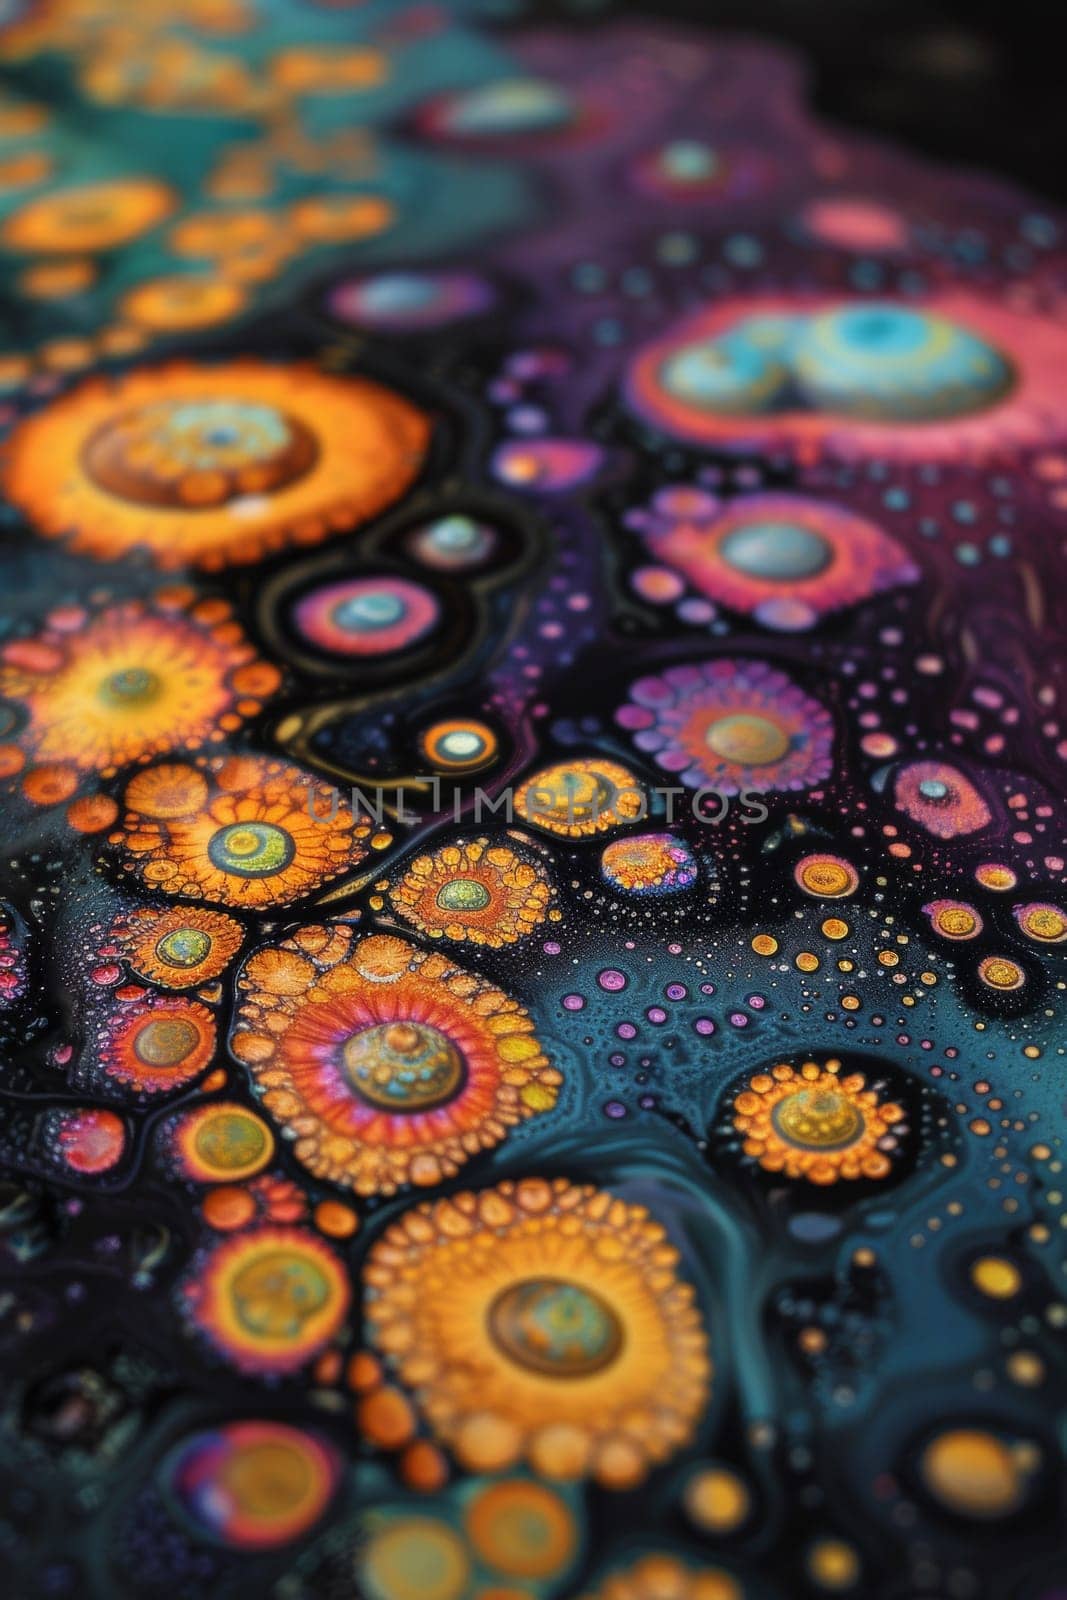 A close up of a painting with many different colors and designs